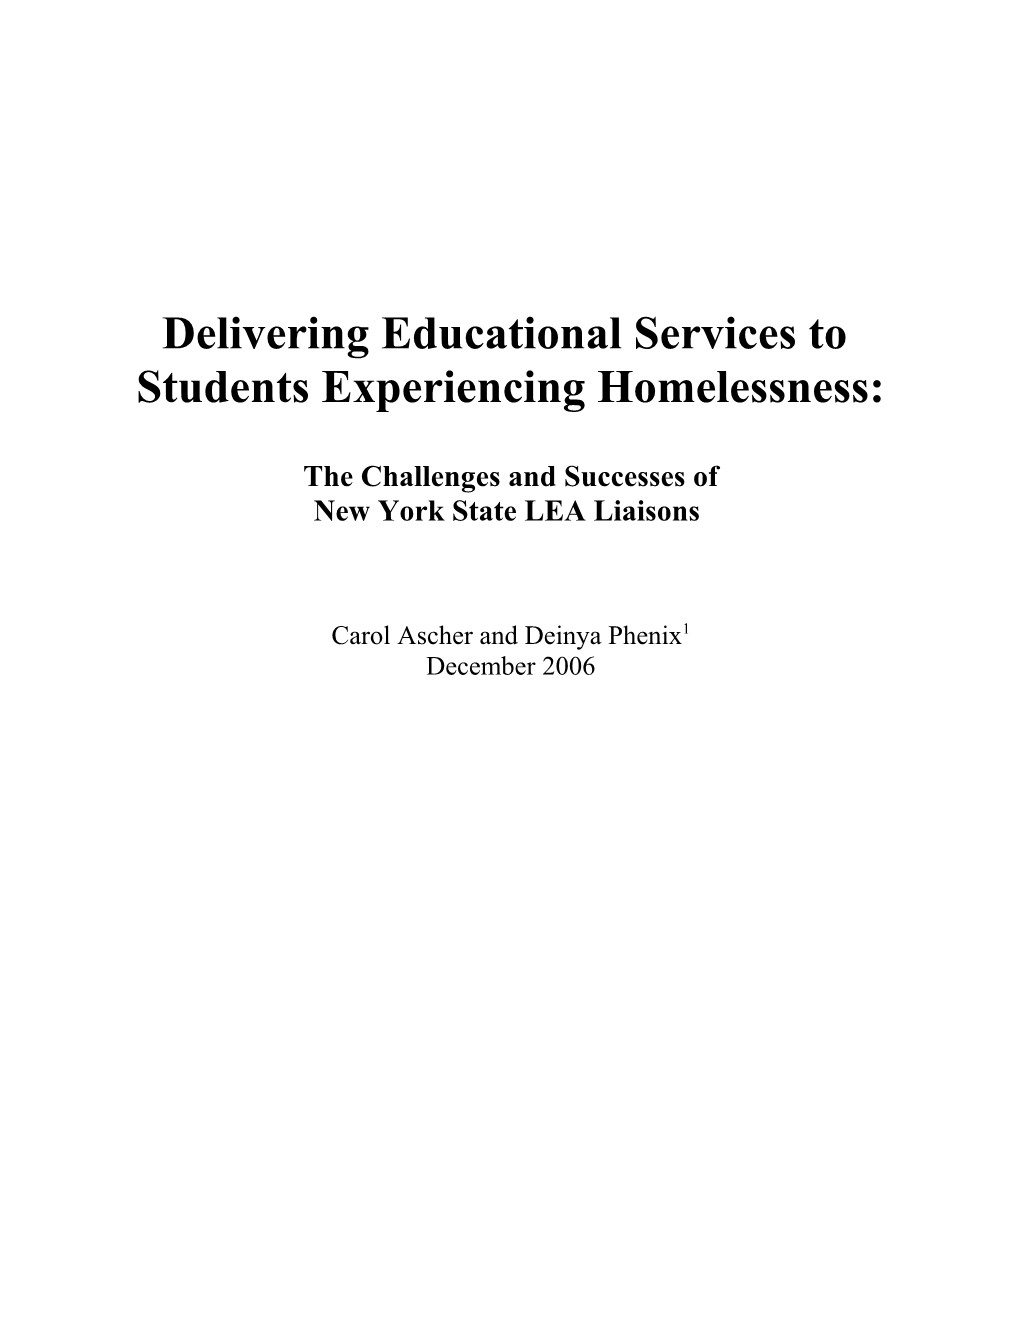 Delivering Educational Services To